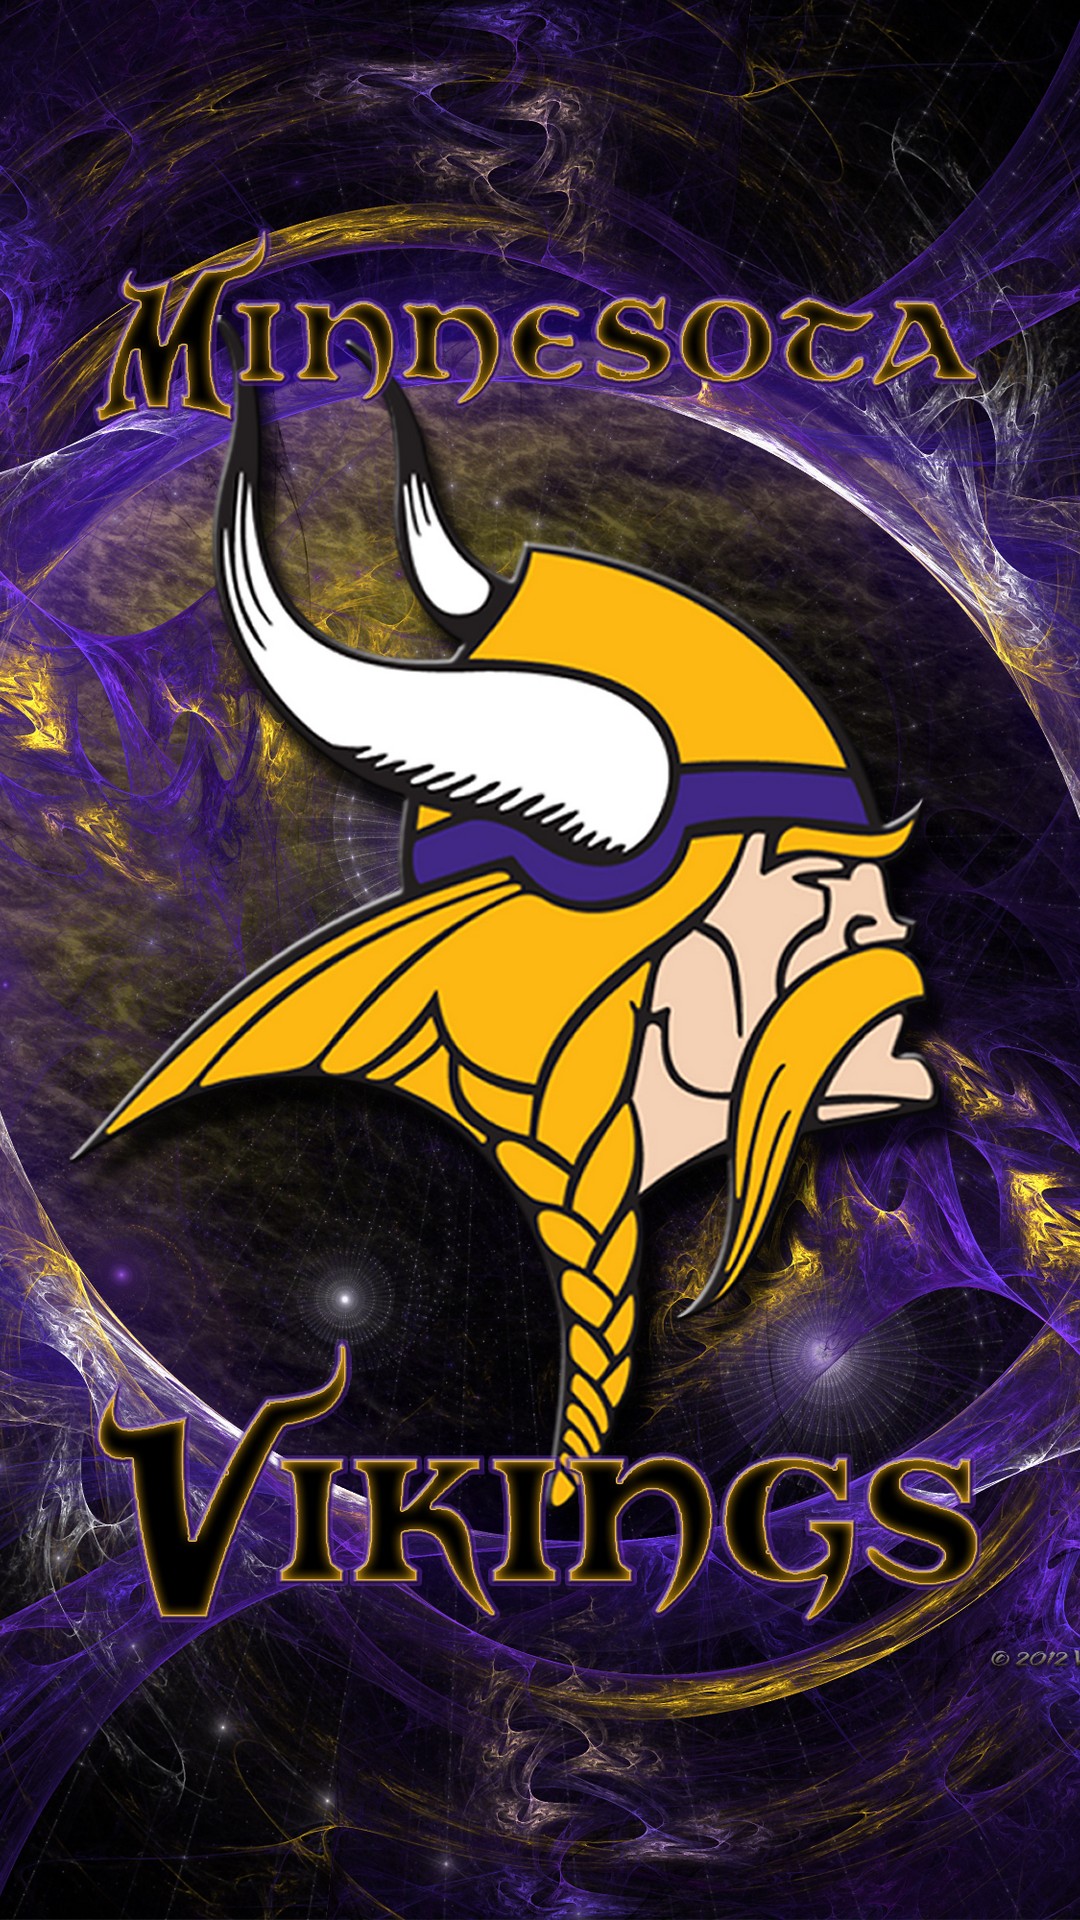 Minnesota Vikings iPhone Wallpaper High Quality with high-resolution 1080x1920 pixel. Donwload and set as wallpaper for your iPhone X, iPhone XS home screen backgrounds, XS Max, XR, iPhone8 lock screen wallpaper, iPhone 7, 6, SE and other mobile devices